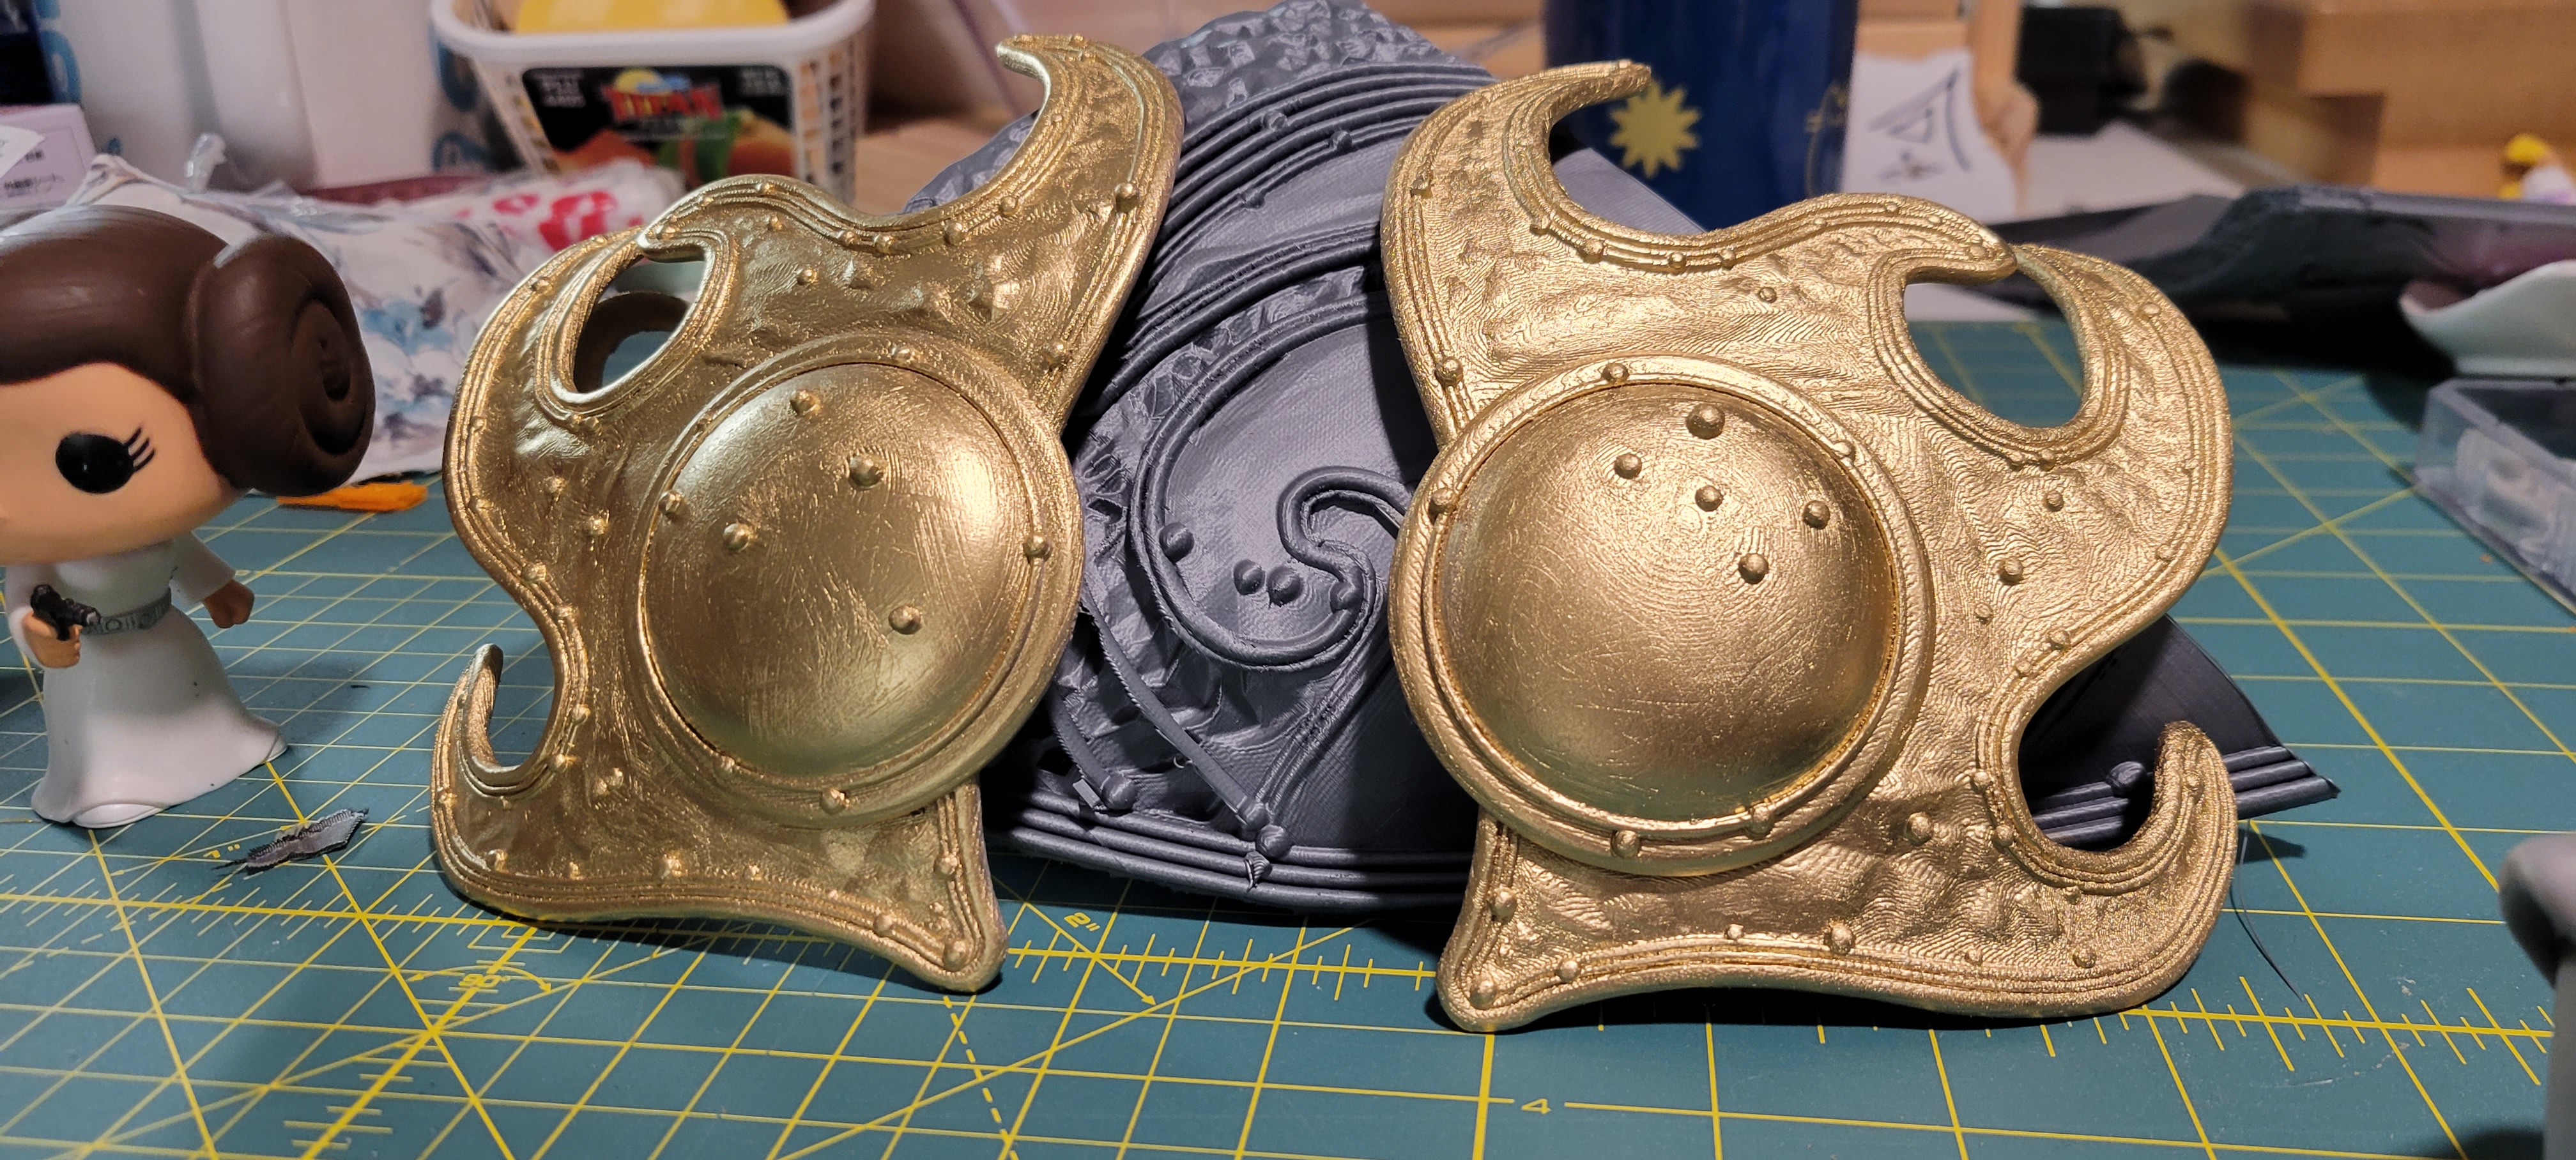 Crown pieces painted